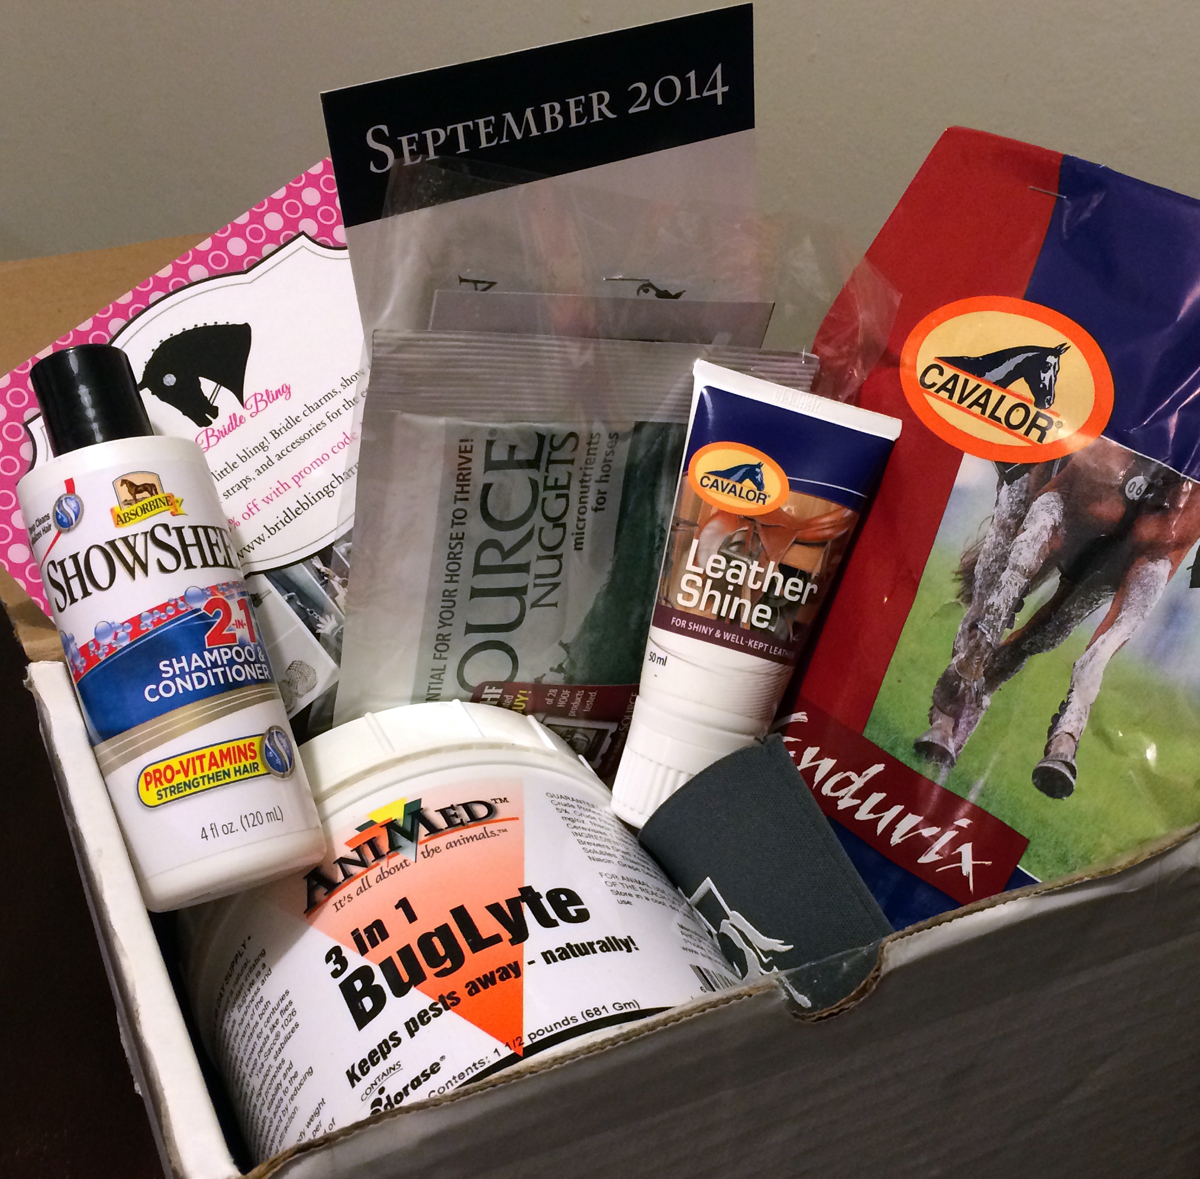 A Horse Box September 2014 Cavalor review with Endurix, AniMed Buglyte, Cavalor Leather Shine, Showsheen Shampoo, Source Nuggest